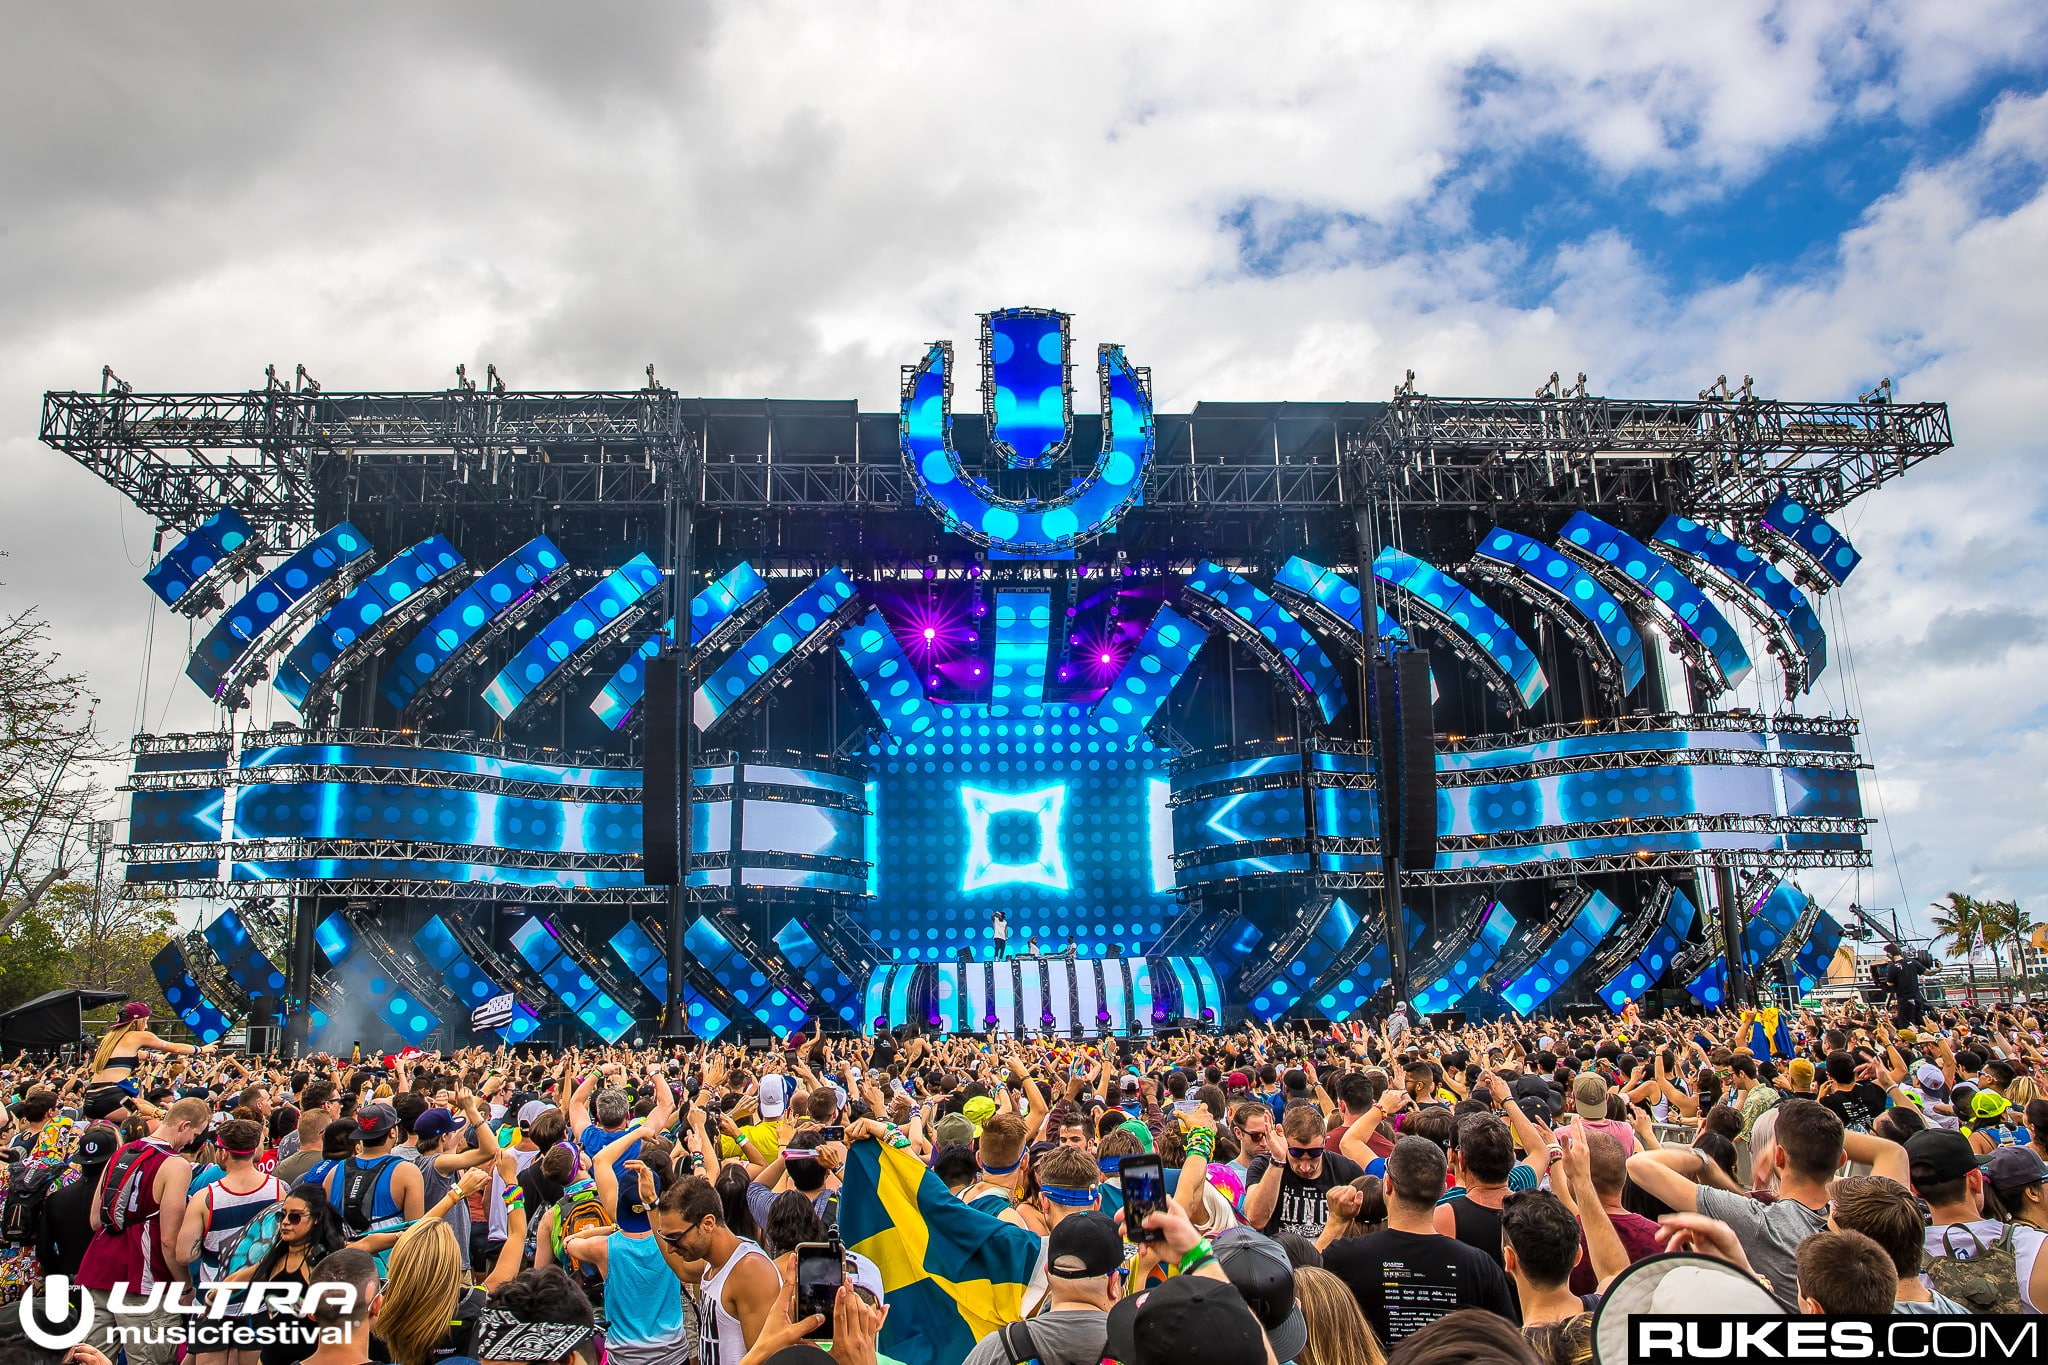 Ultra Music Festival, Rukes, DJs, crowds, photography, group of people